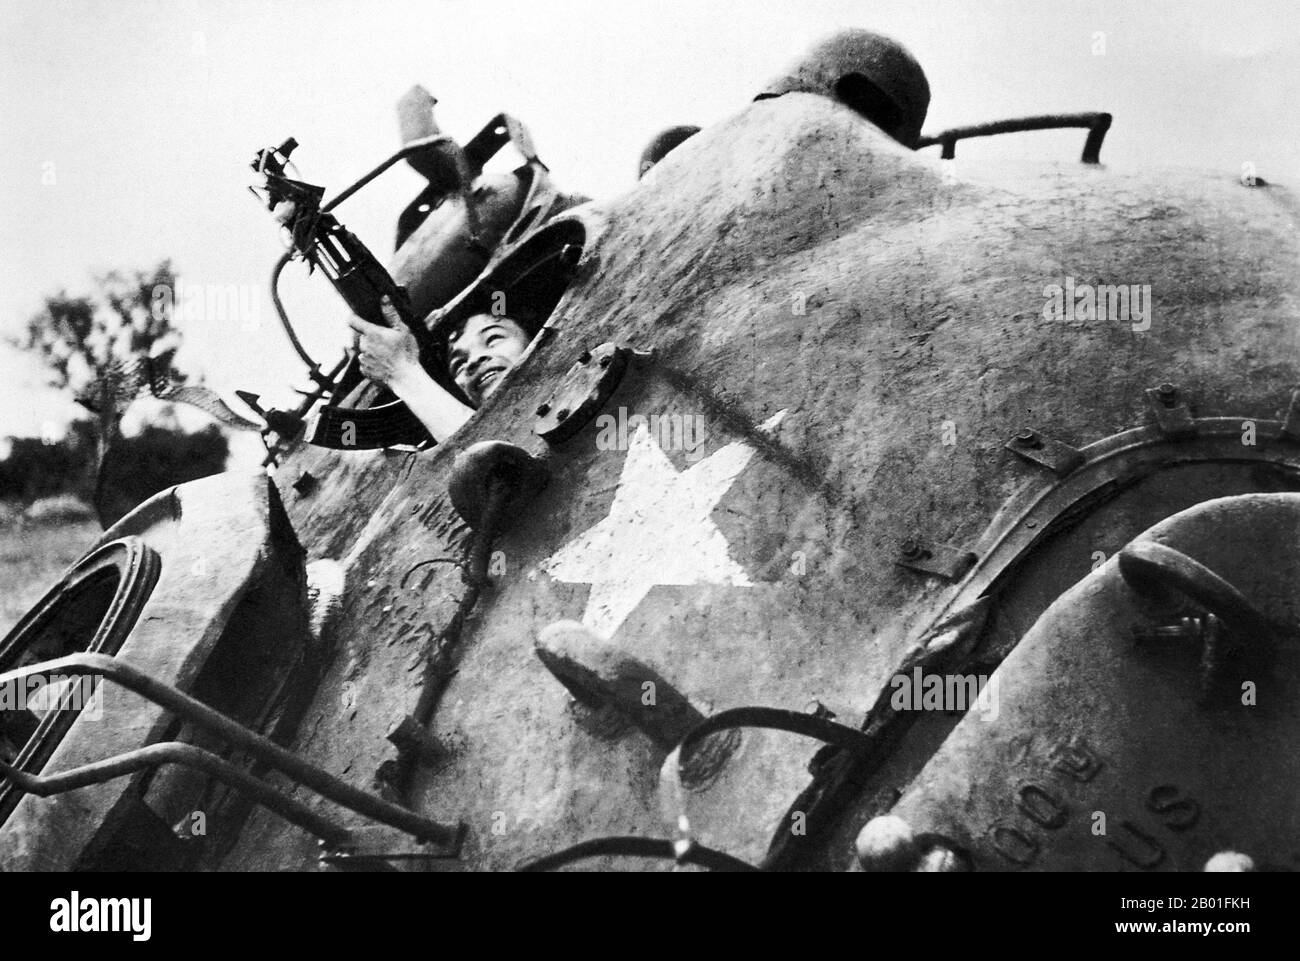 Vietnam: Using turret of destroyed US tank as cover, Cu Chi, 1968.  The Second Indochina War, known in America as the Vietnam War, was a Cold War era military conflict that occurred in Vietnam, Laos, and Cambodia from 1 November 1955 to the fall of Saigon on 30 April 1975. This war followed the First Indochina War and was fought between North Vietnam, supported by its communist allies, and the government of South Vietnam, supported by the U.S. and other anti-communist nations. The U.S. government viewed involvement in the war as a way to prevent a communist takeover of South Vietnam. Stock Photo